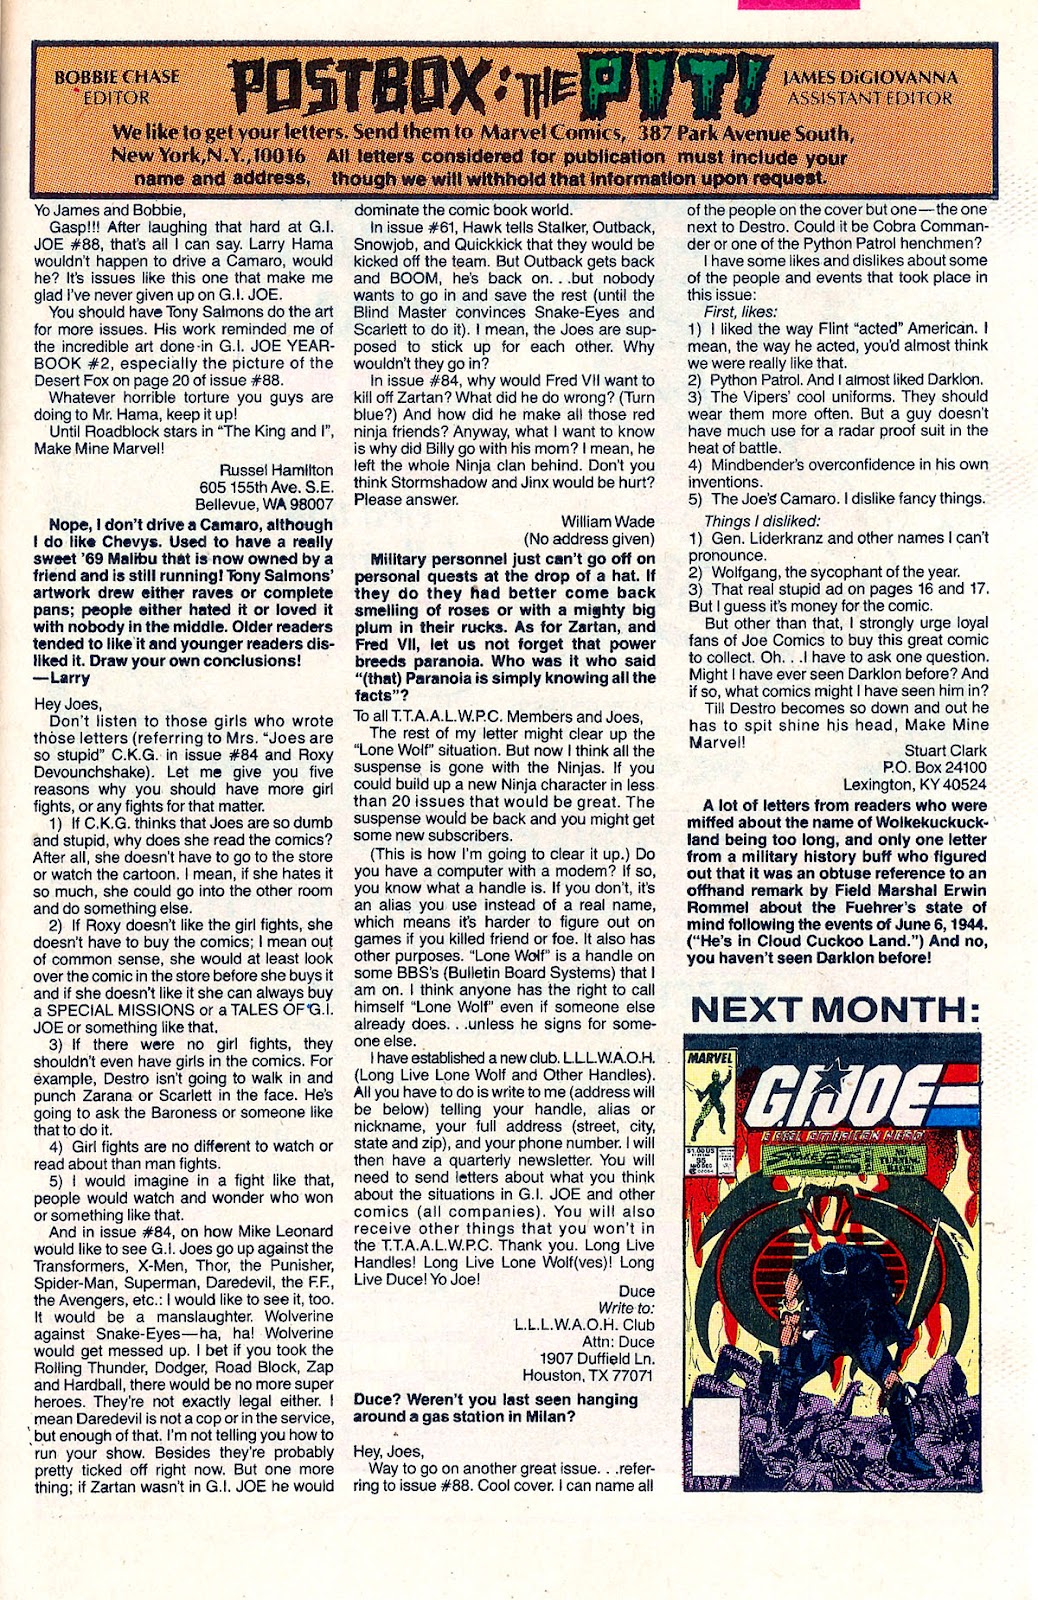 G.I. Joe: A Real American Hero issue 94 - Page 24